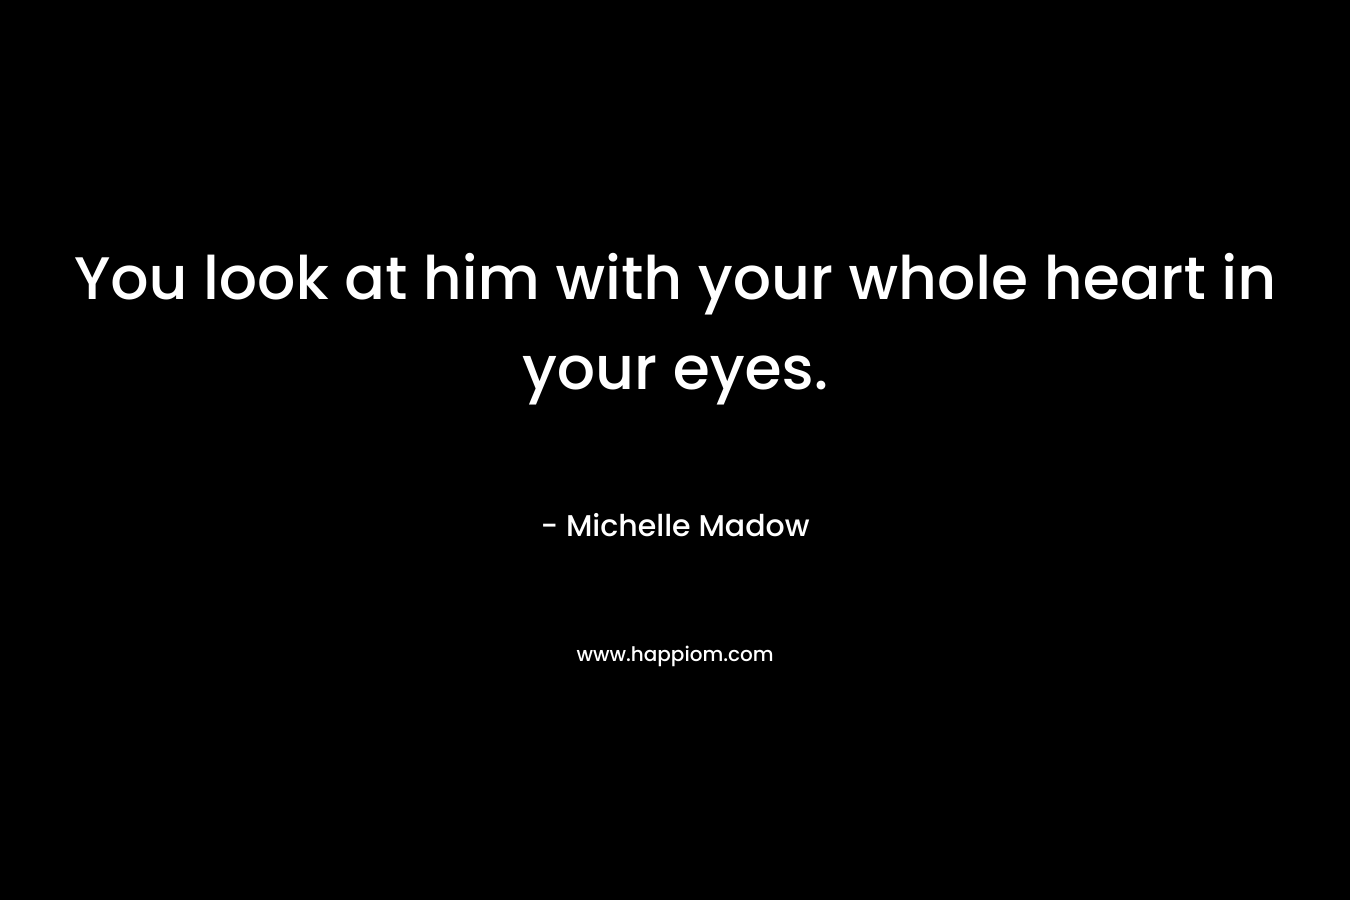 You look at him with your whole heart in your eyes. – Michelle Madow